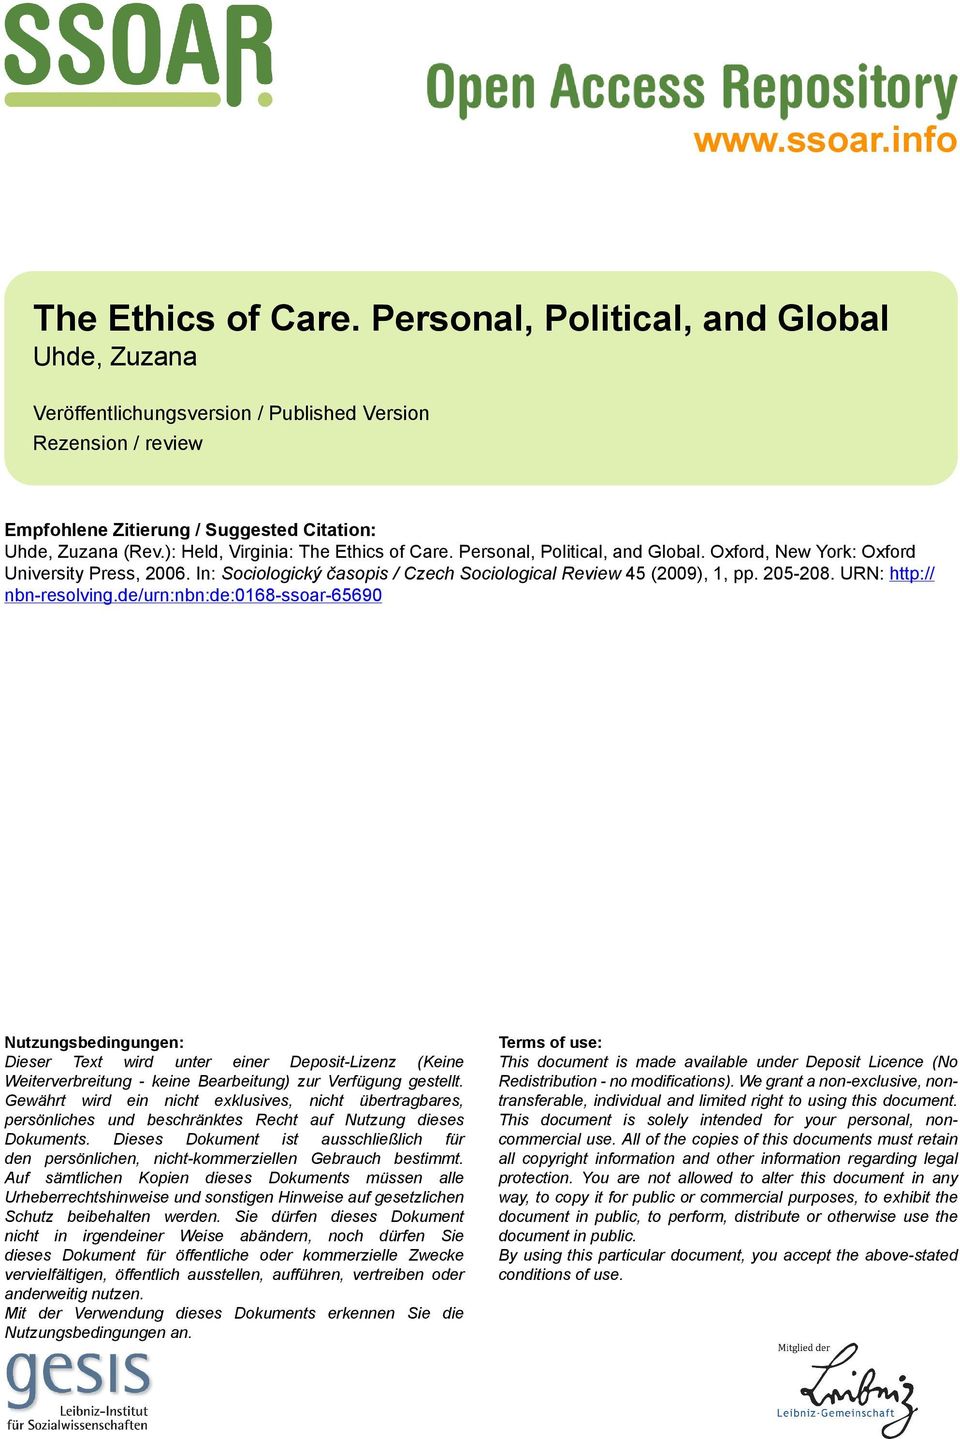 ): Held, Virginia: The Ethics of Care. Personal, Political, and Global. Oxford, New York: Oxford University Press, 2006. In: Sociologický časopis / Czech Sociological Review 45 (2009), 1, pp. 205-208.